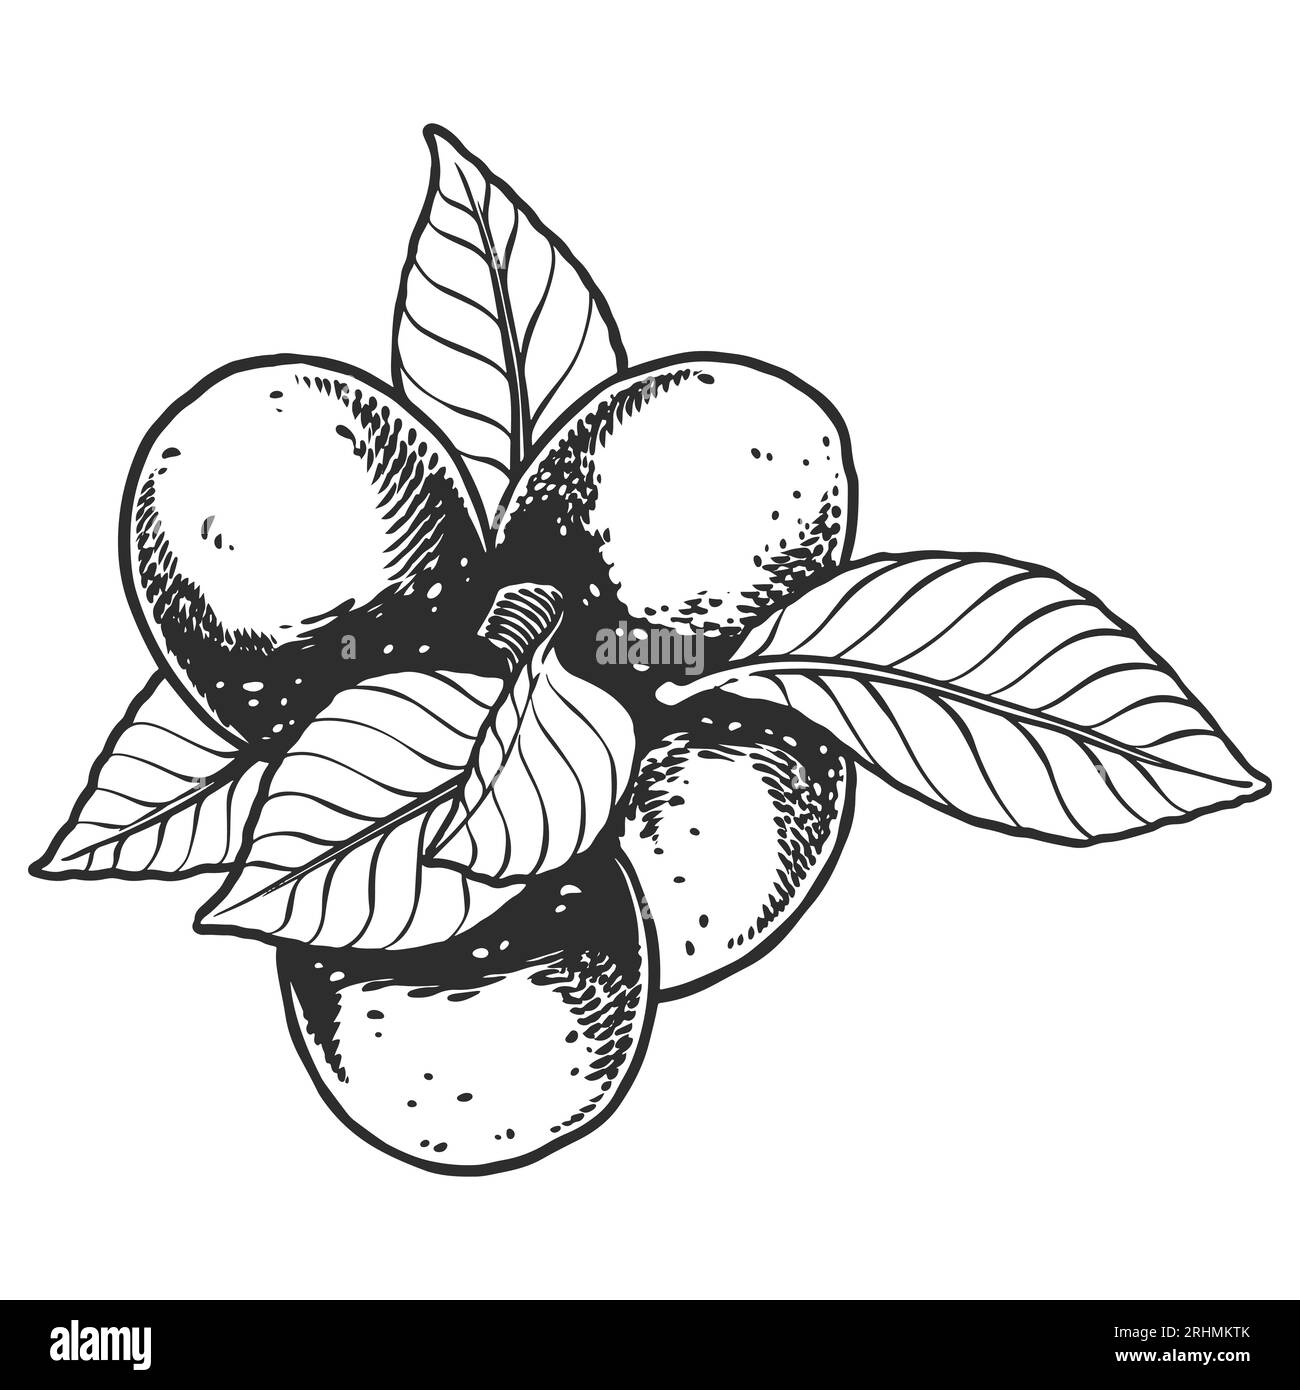 Simple Lime Line Vector Drawing on White. Citrus Logo, Icon Design